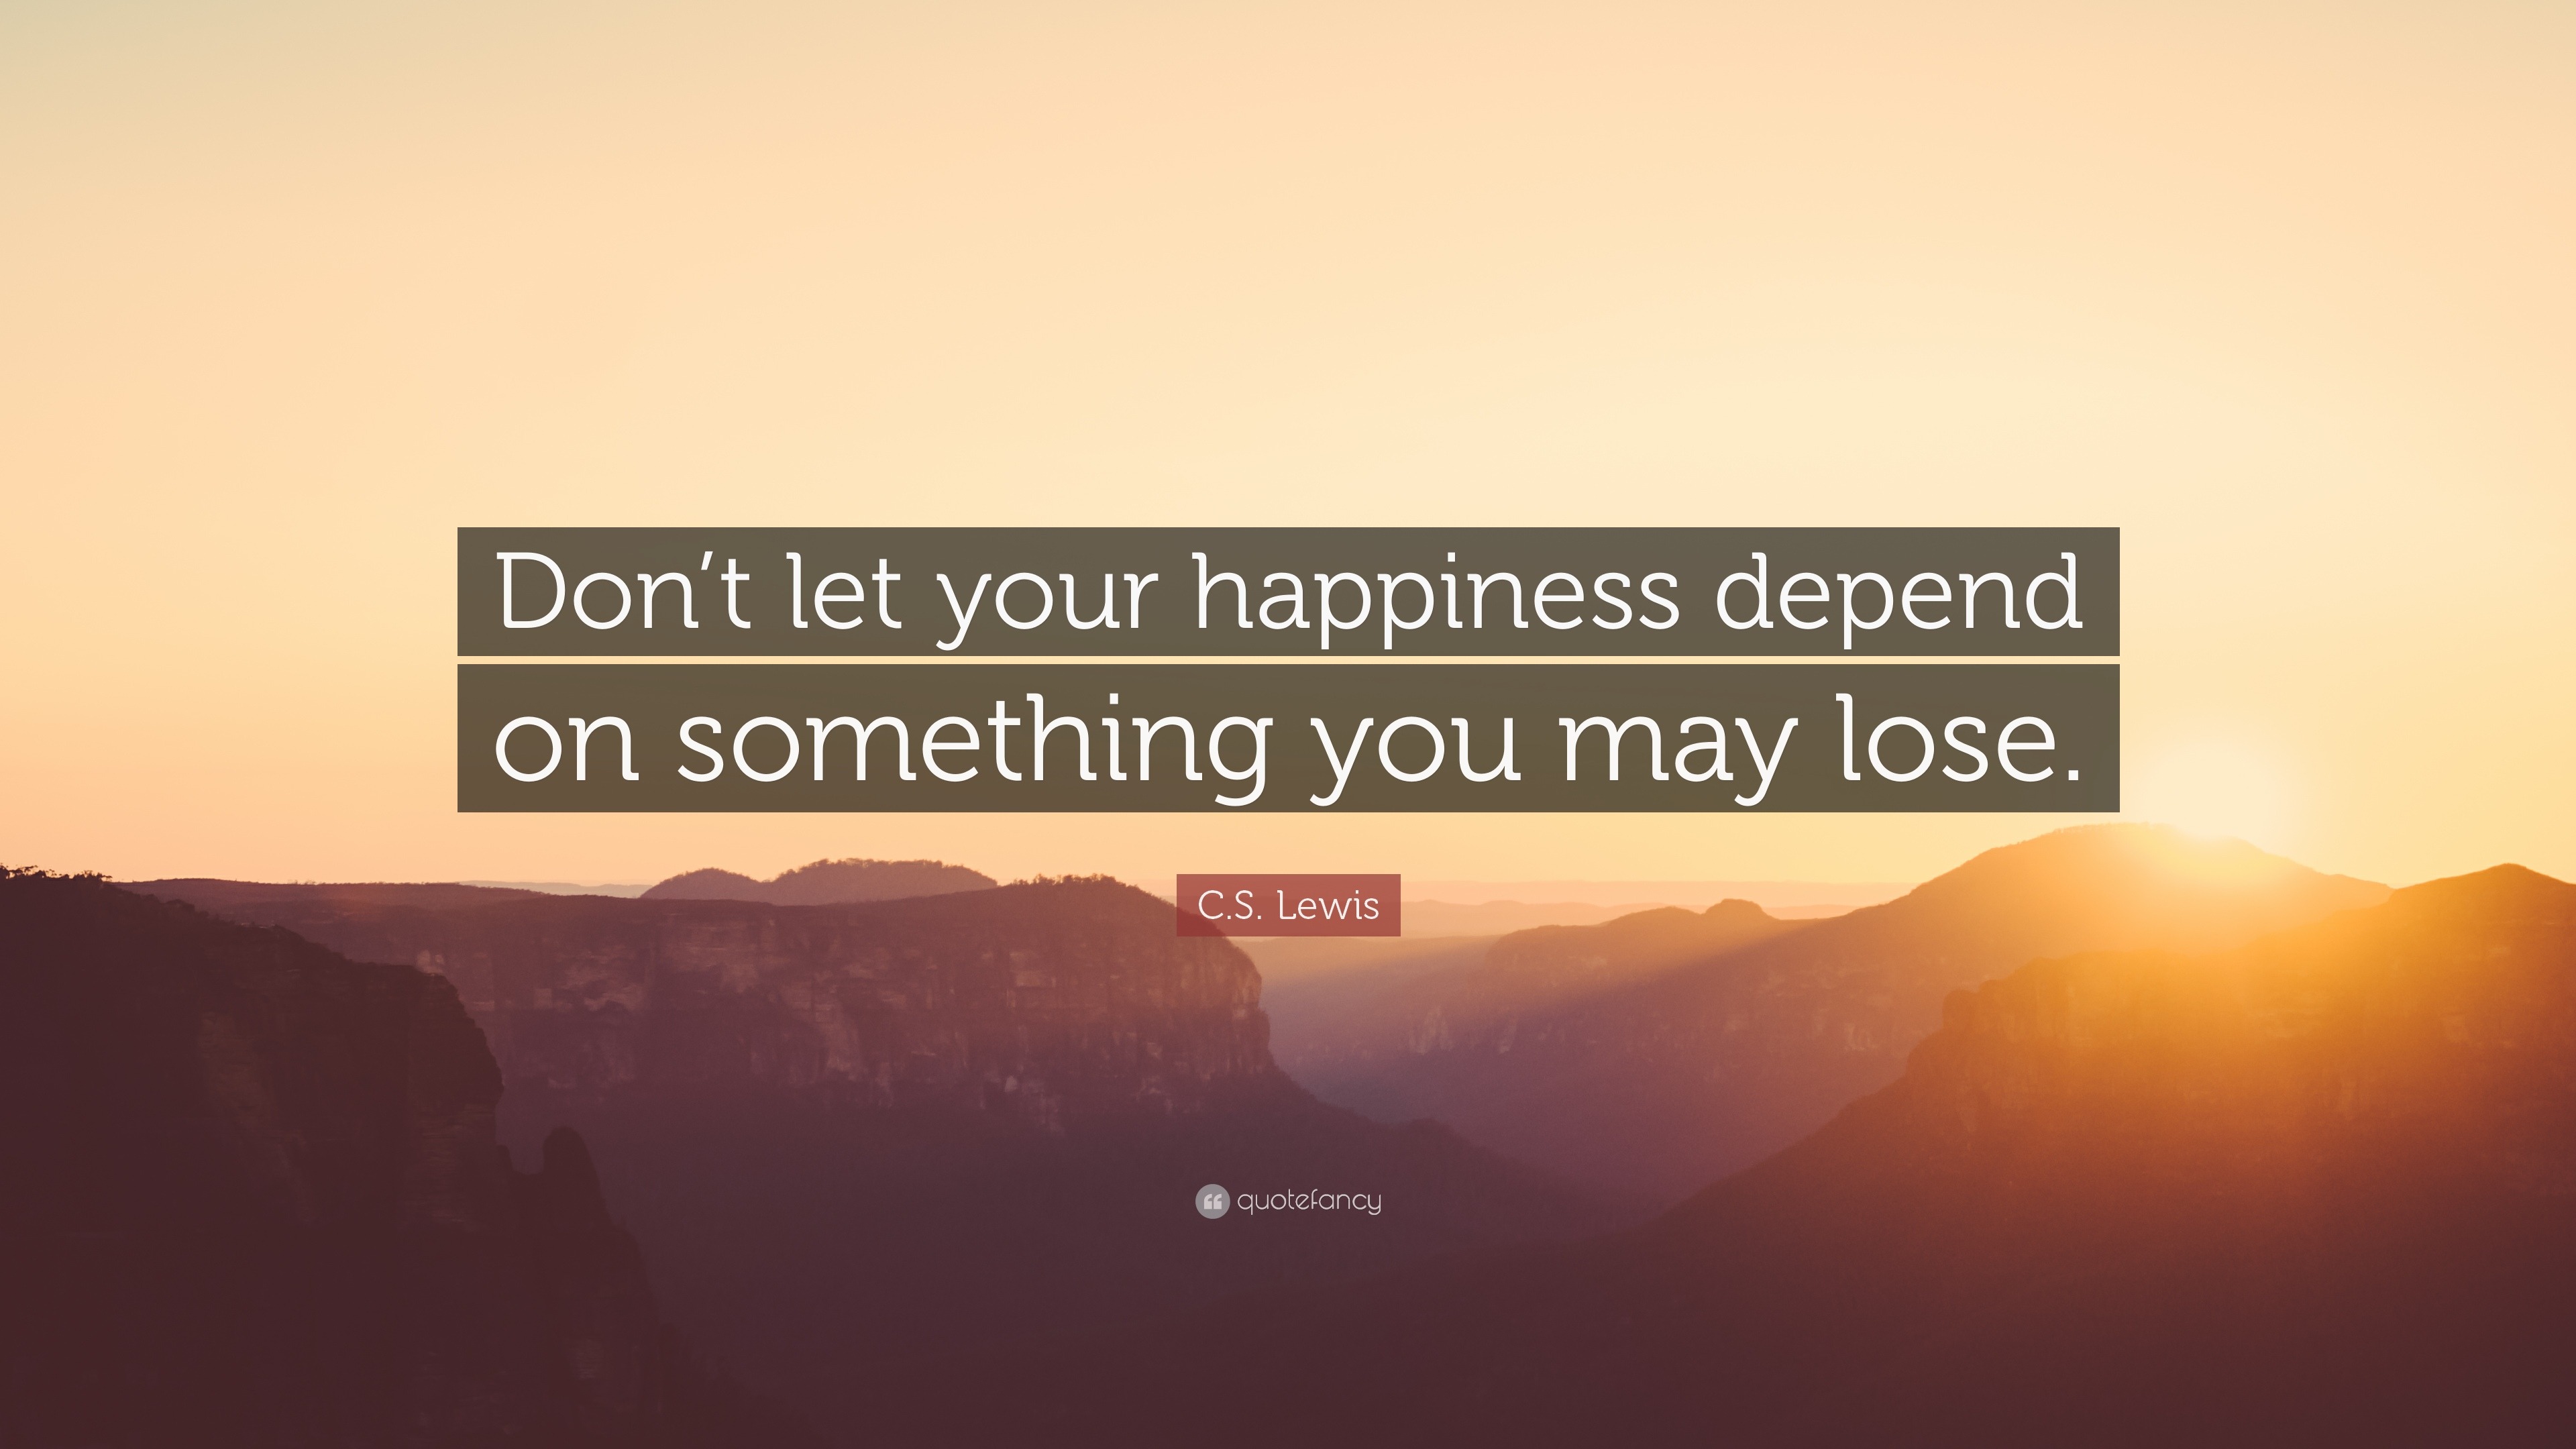 C. S. Lewis Quote “Don’t let your happiness depend on